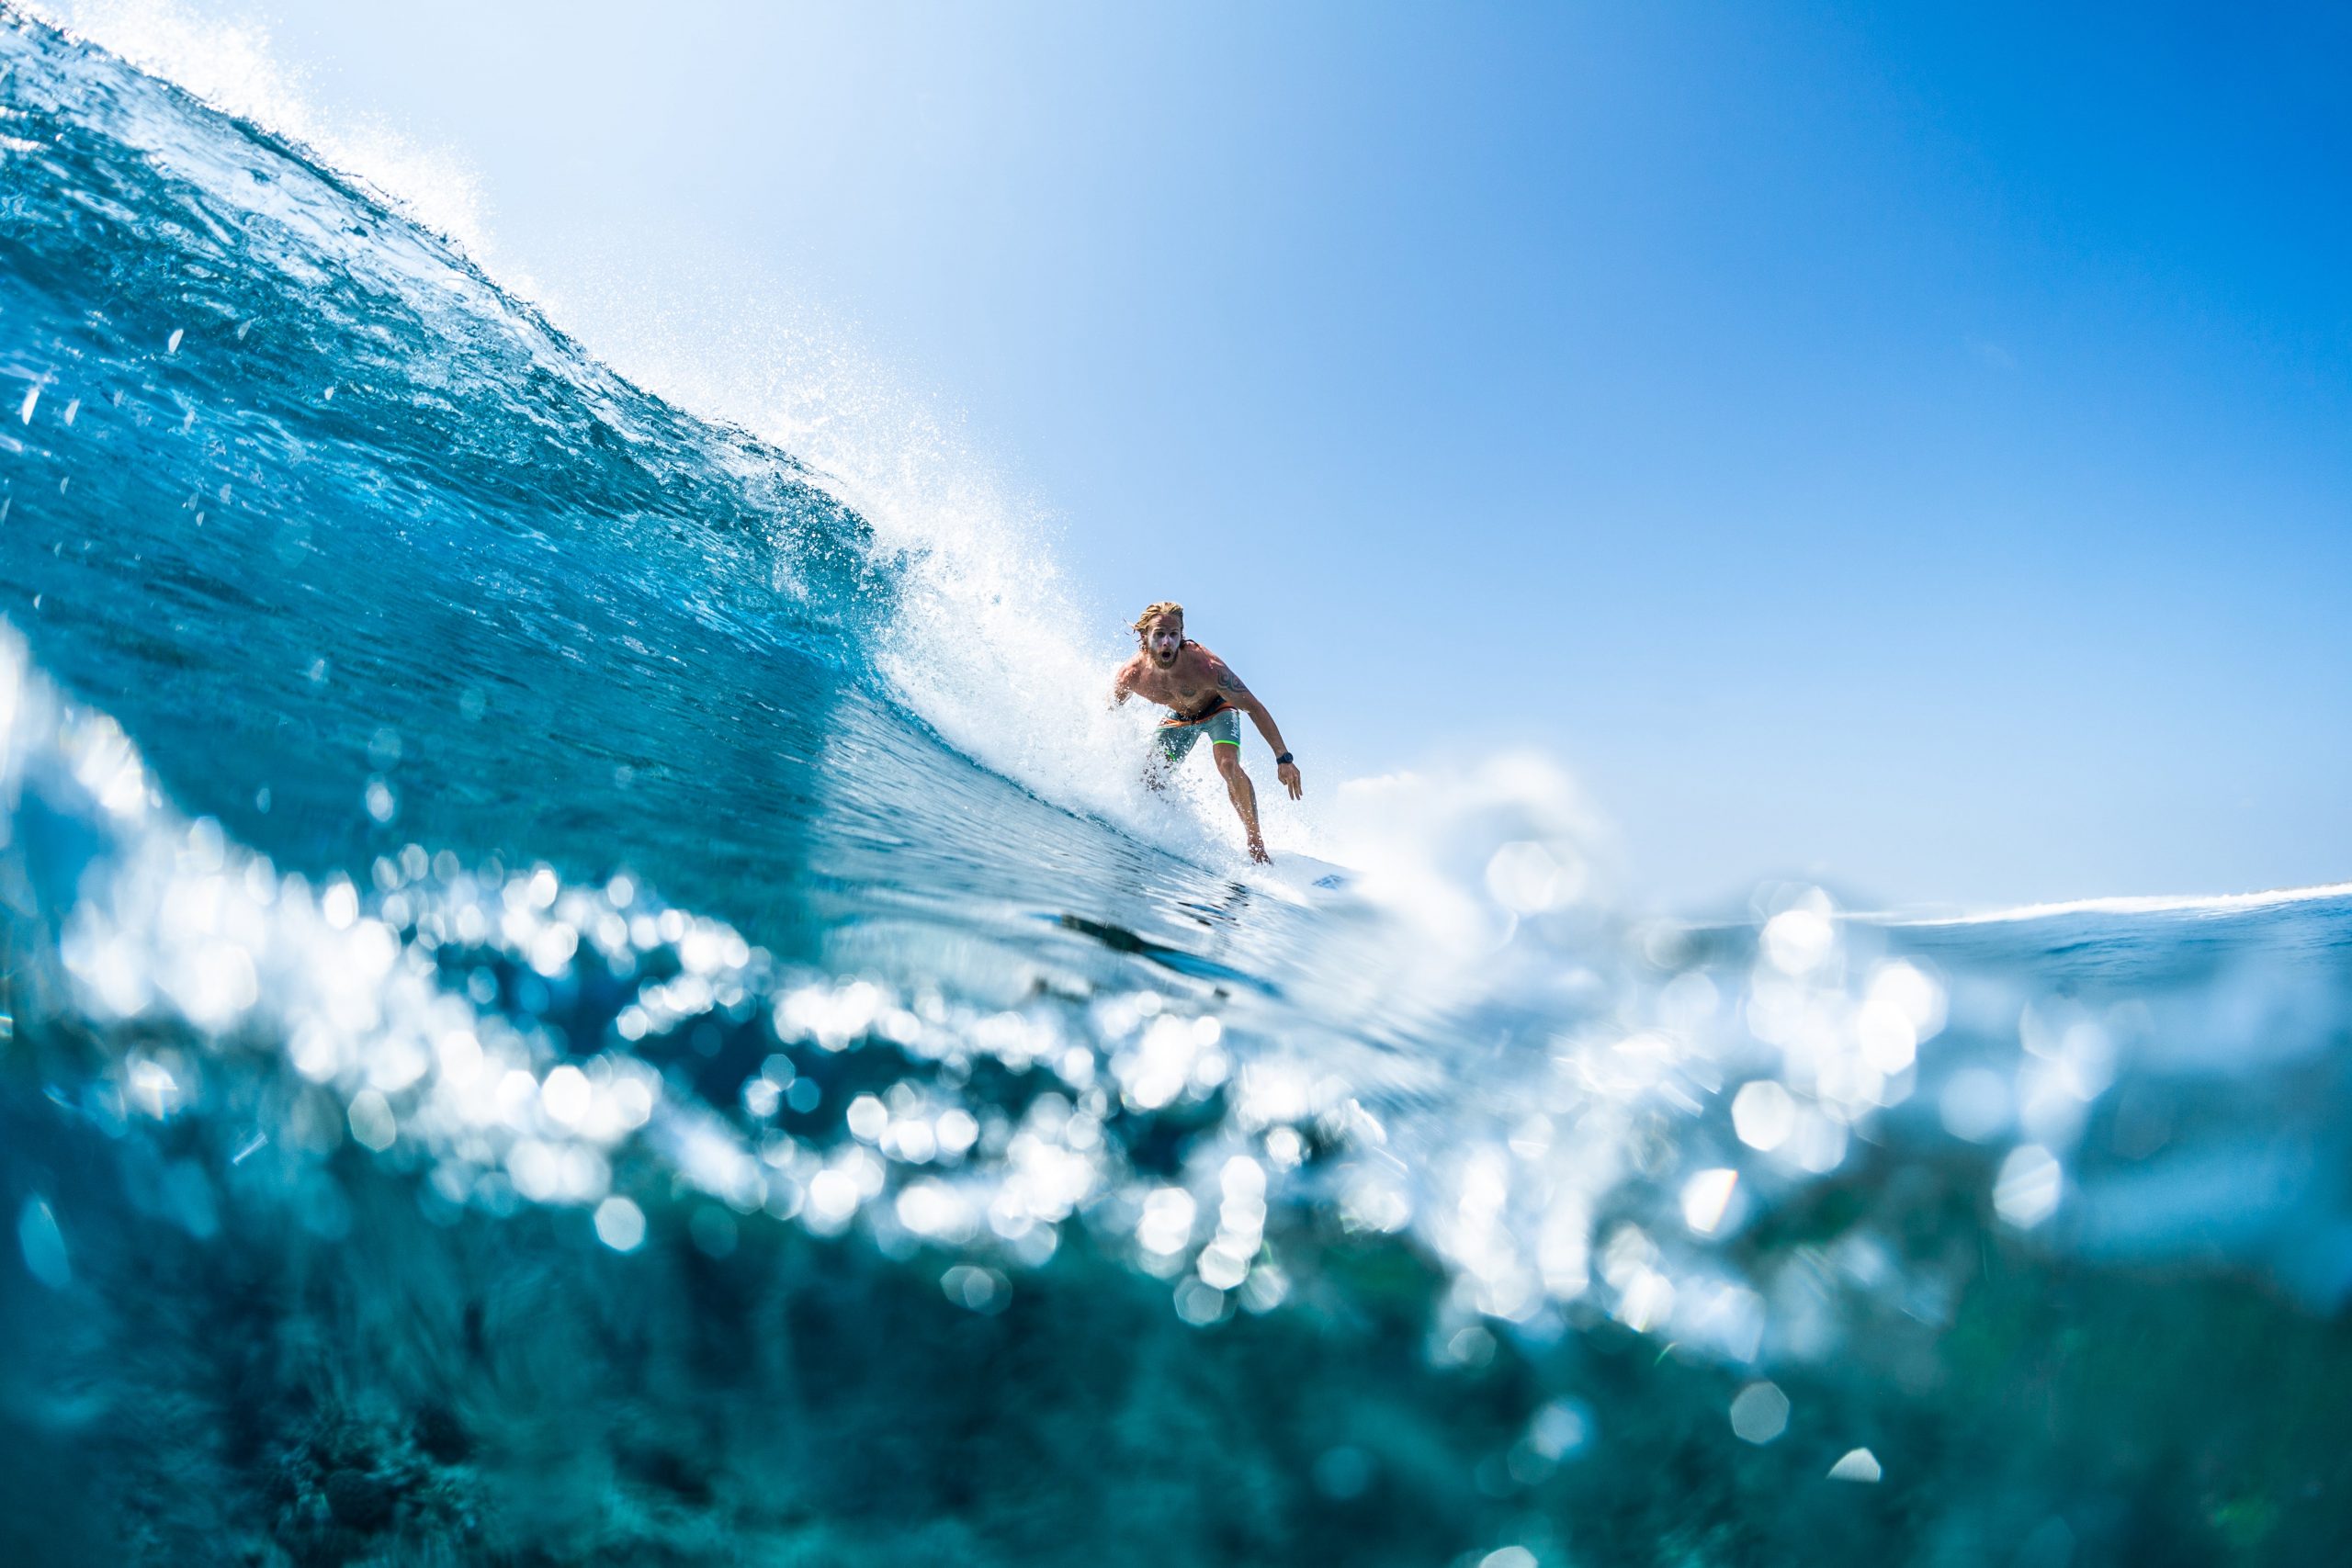 surf spots in the maldives